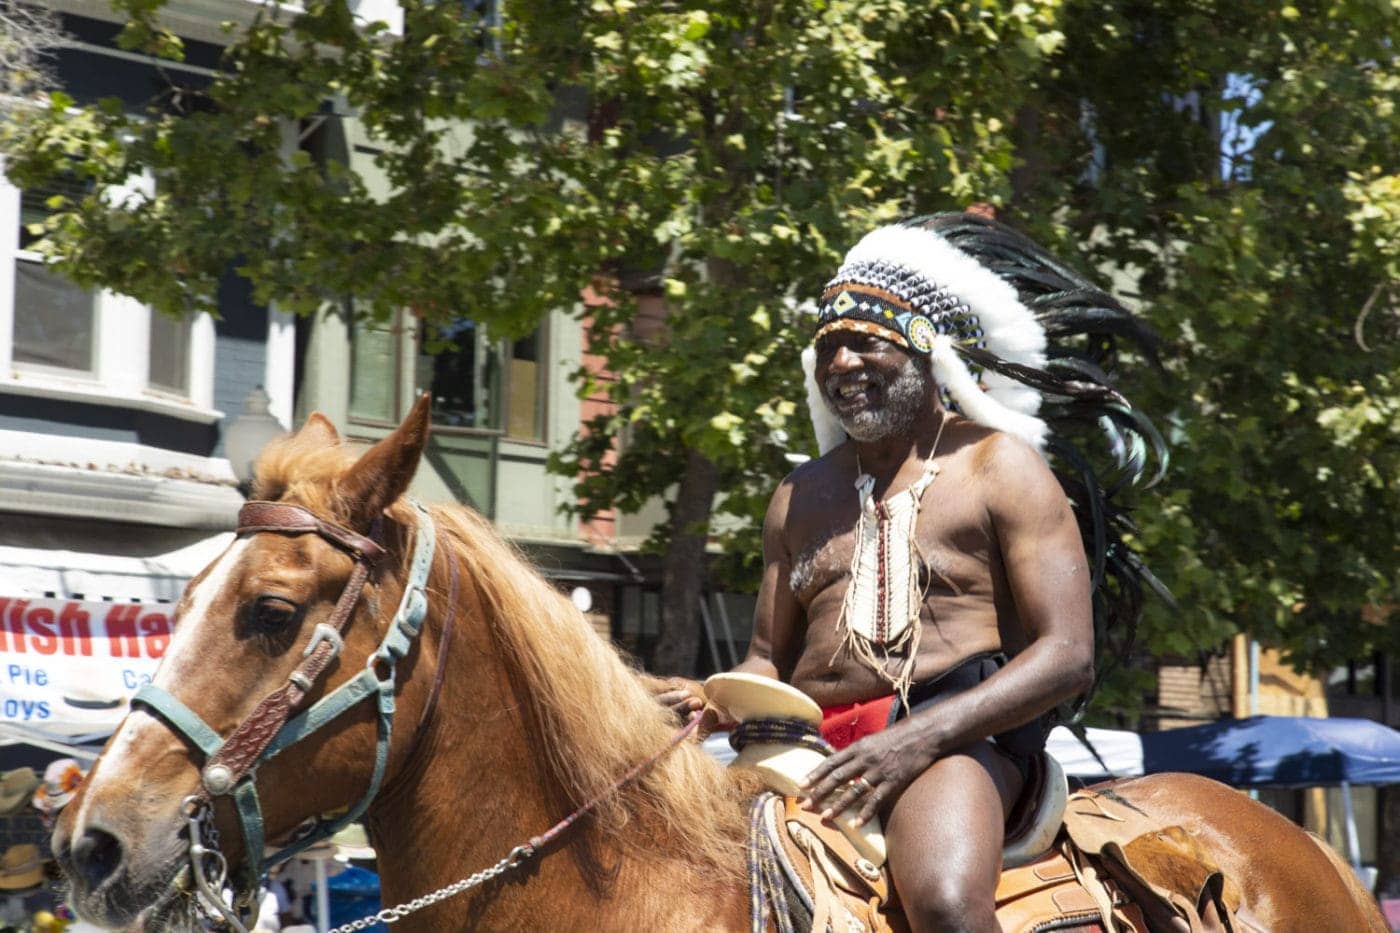 Thomas-Leonard-horse-Paco-at-Berkeley-Juneteenth-Festival-061922-by-Estafany-Gonzalez-KQED-1400x933, Coopting Juneteenth with a federal holiday, Behind Enemy Lines 